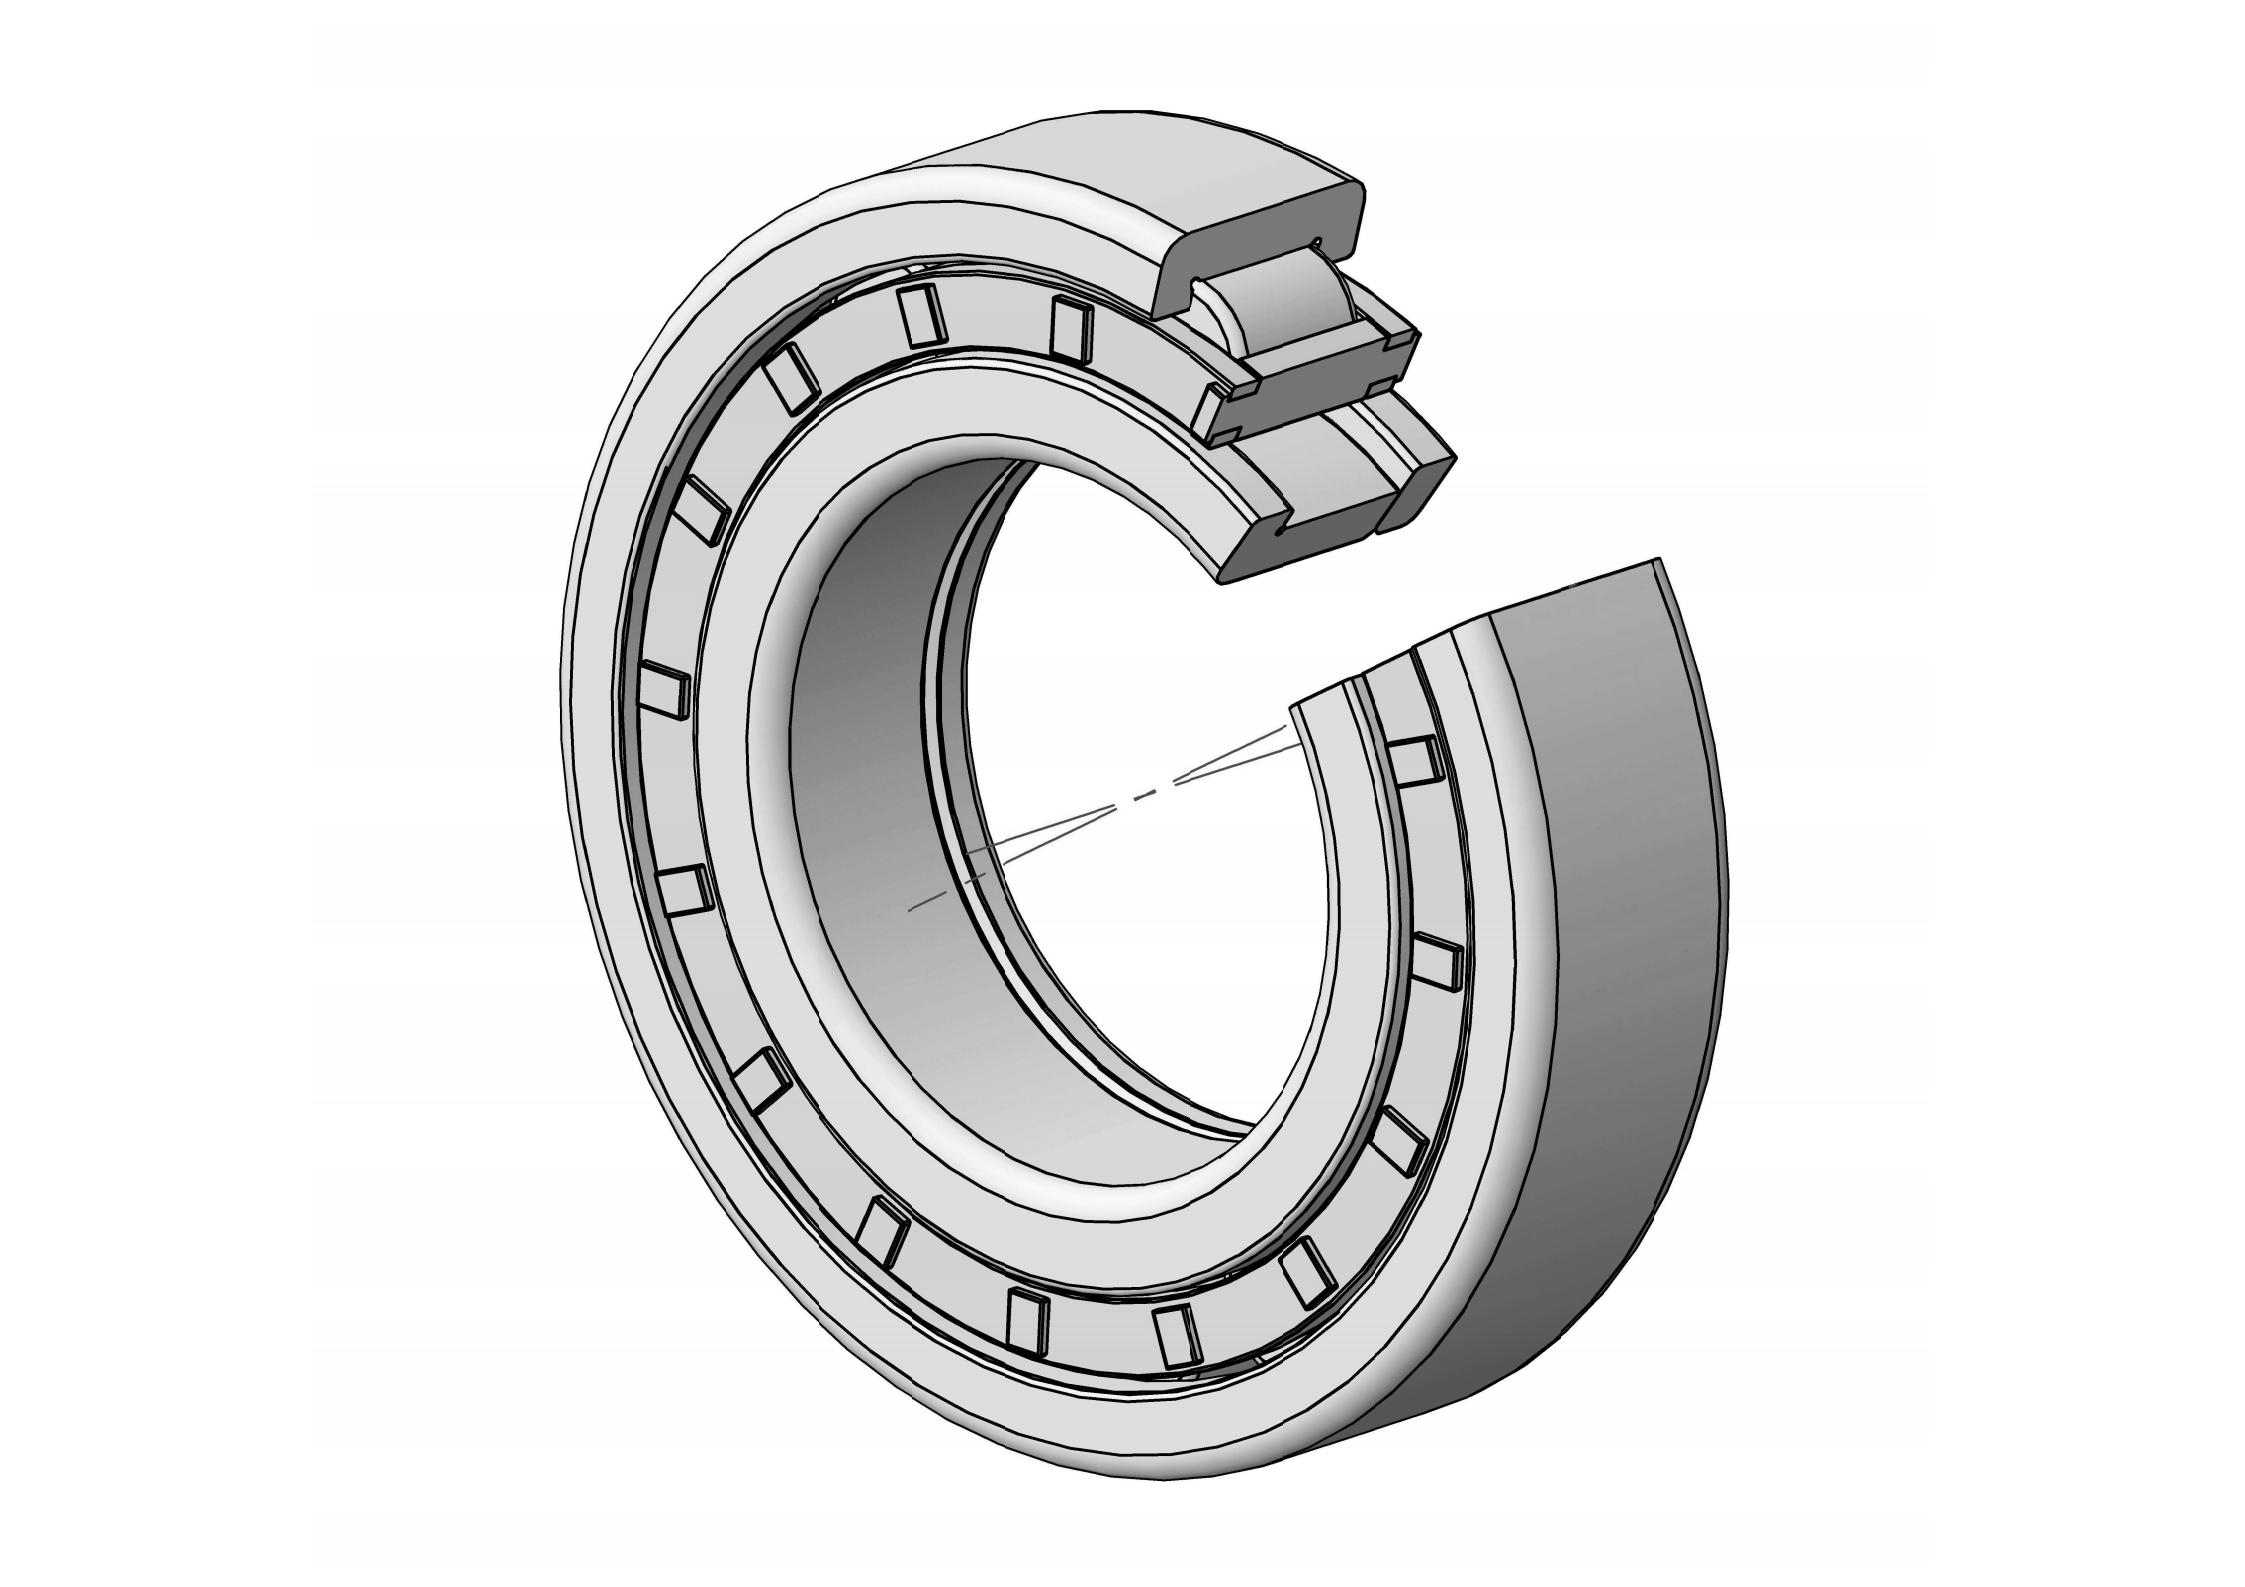 NUP2344-EM Single Row Cylindrical roller bearing 